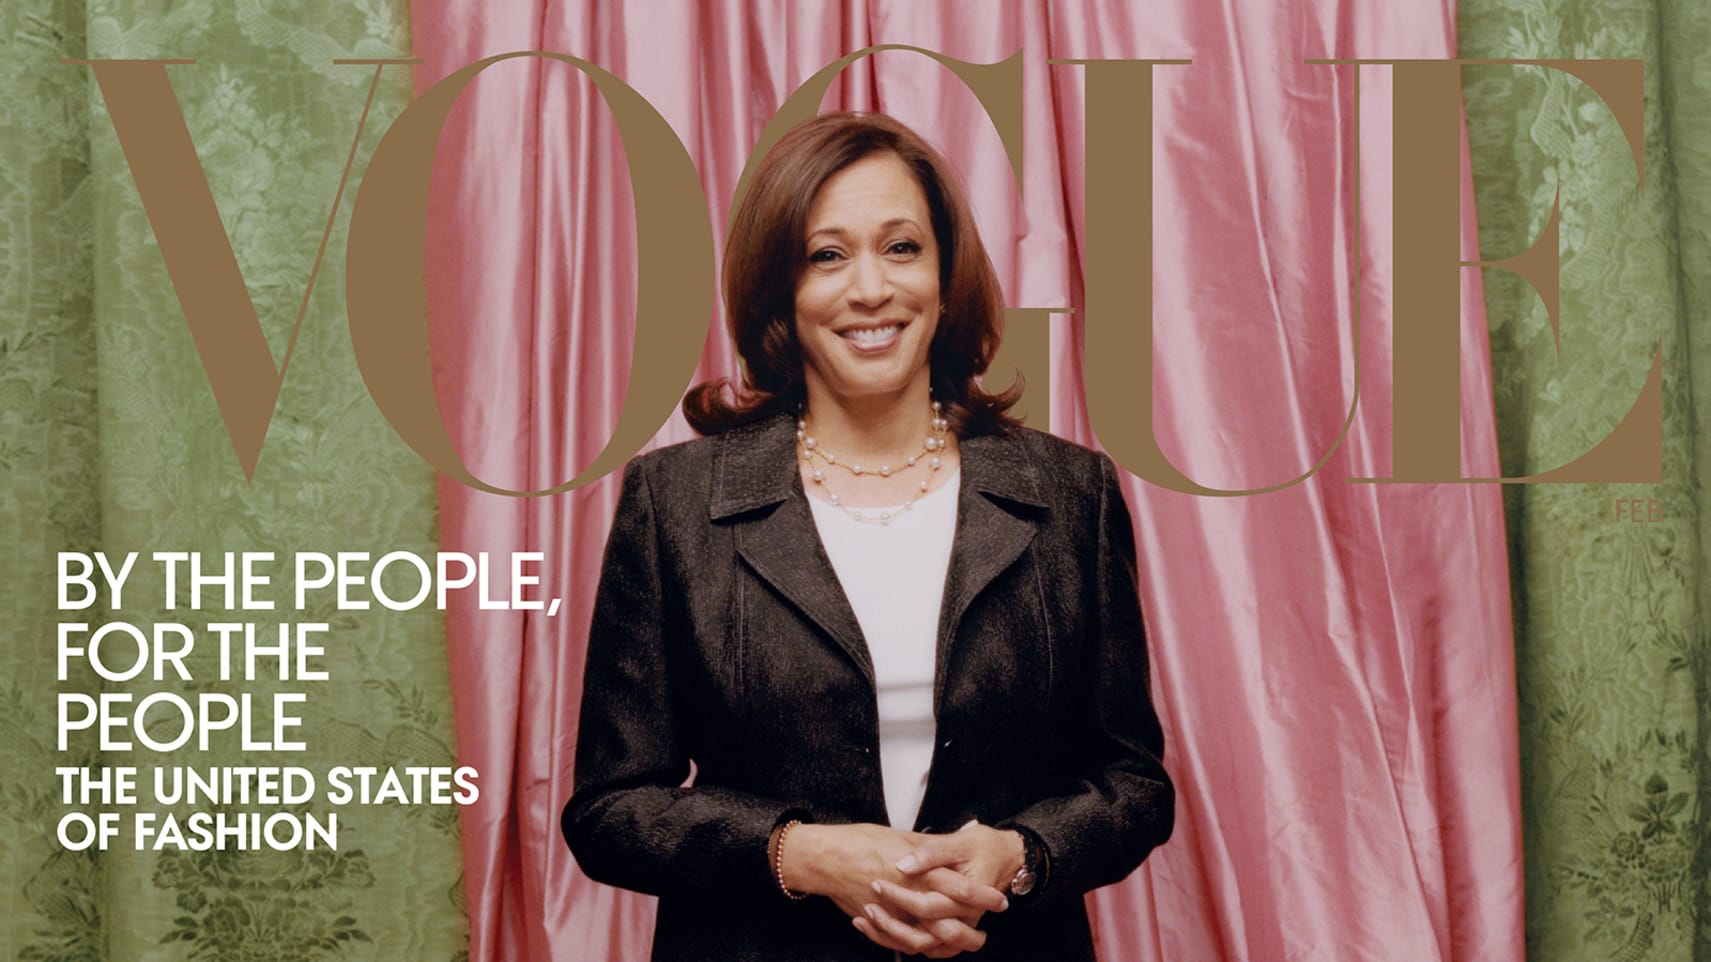 Controversy over the port of Kamala Harris in Vogue